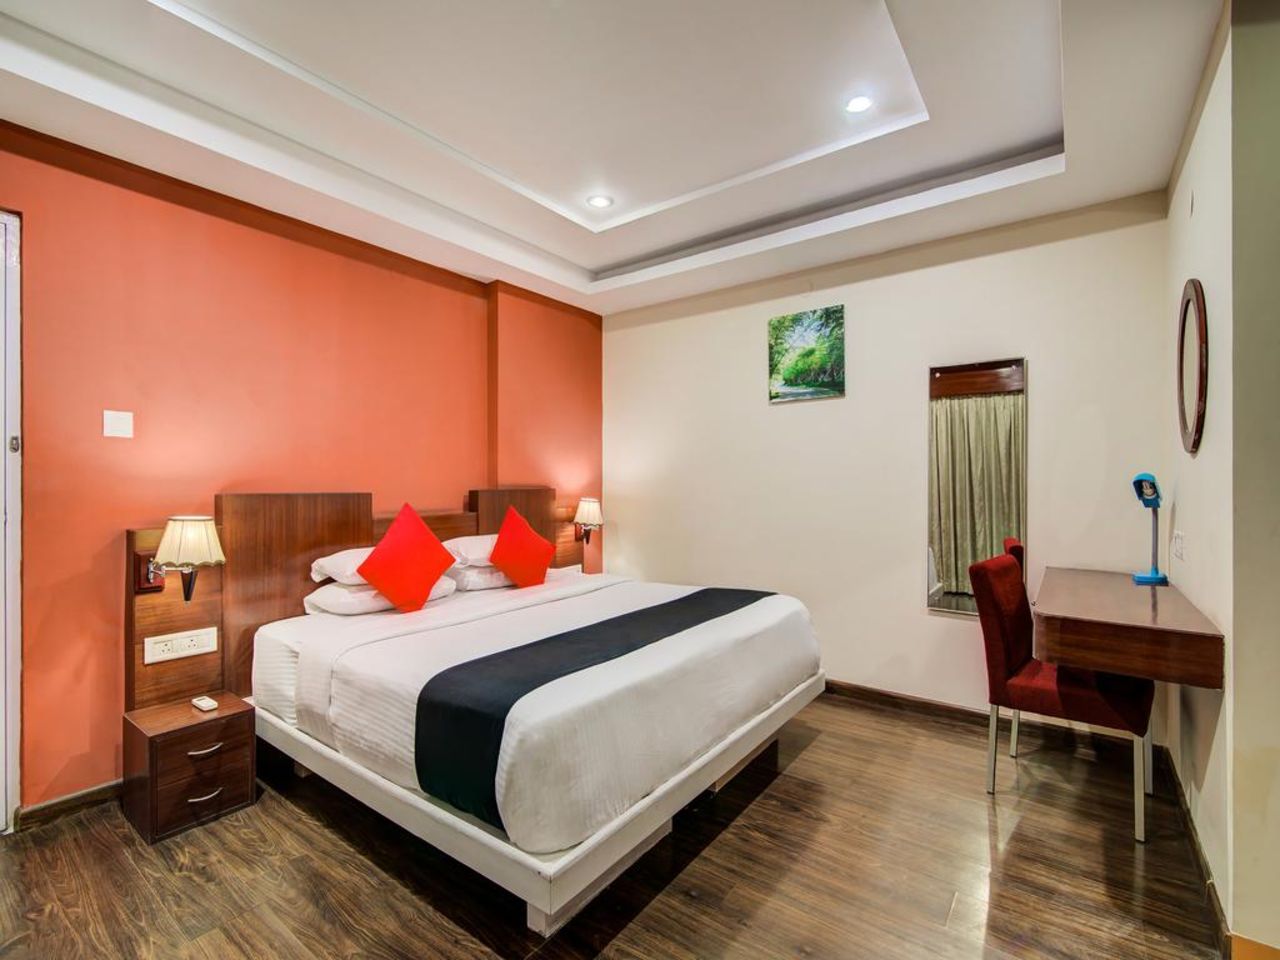 Facilities of Having Accommodation in the Top Hotels in Bangalore